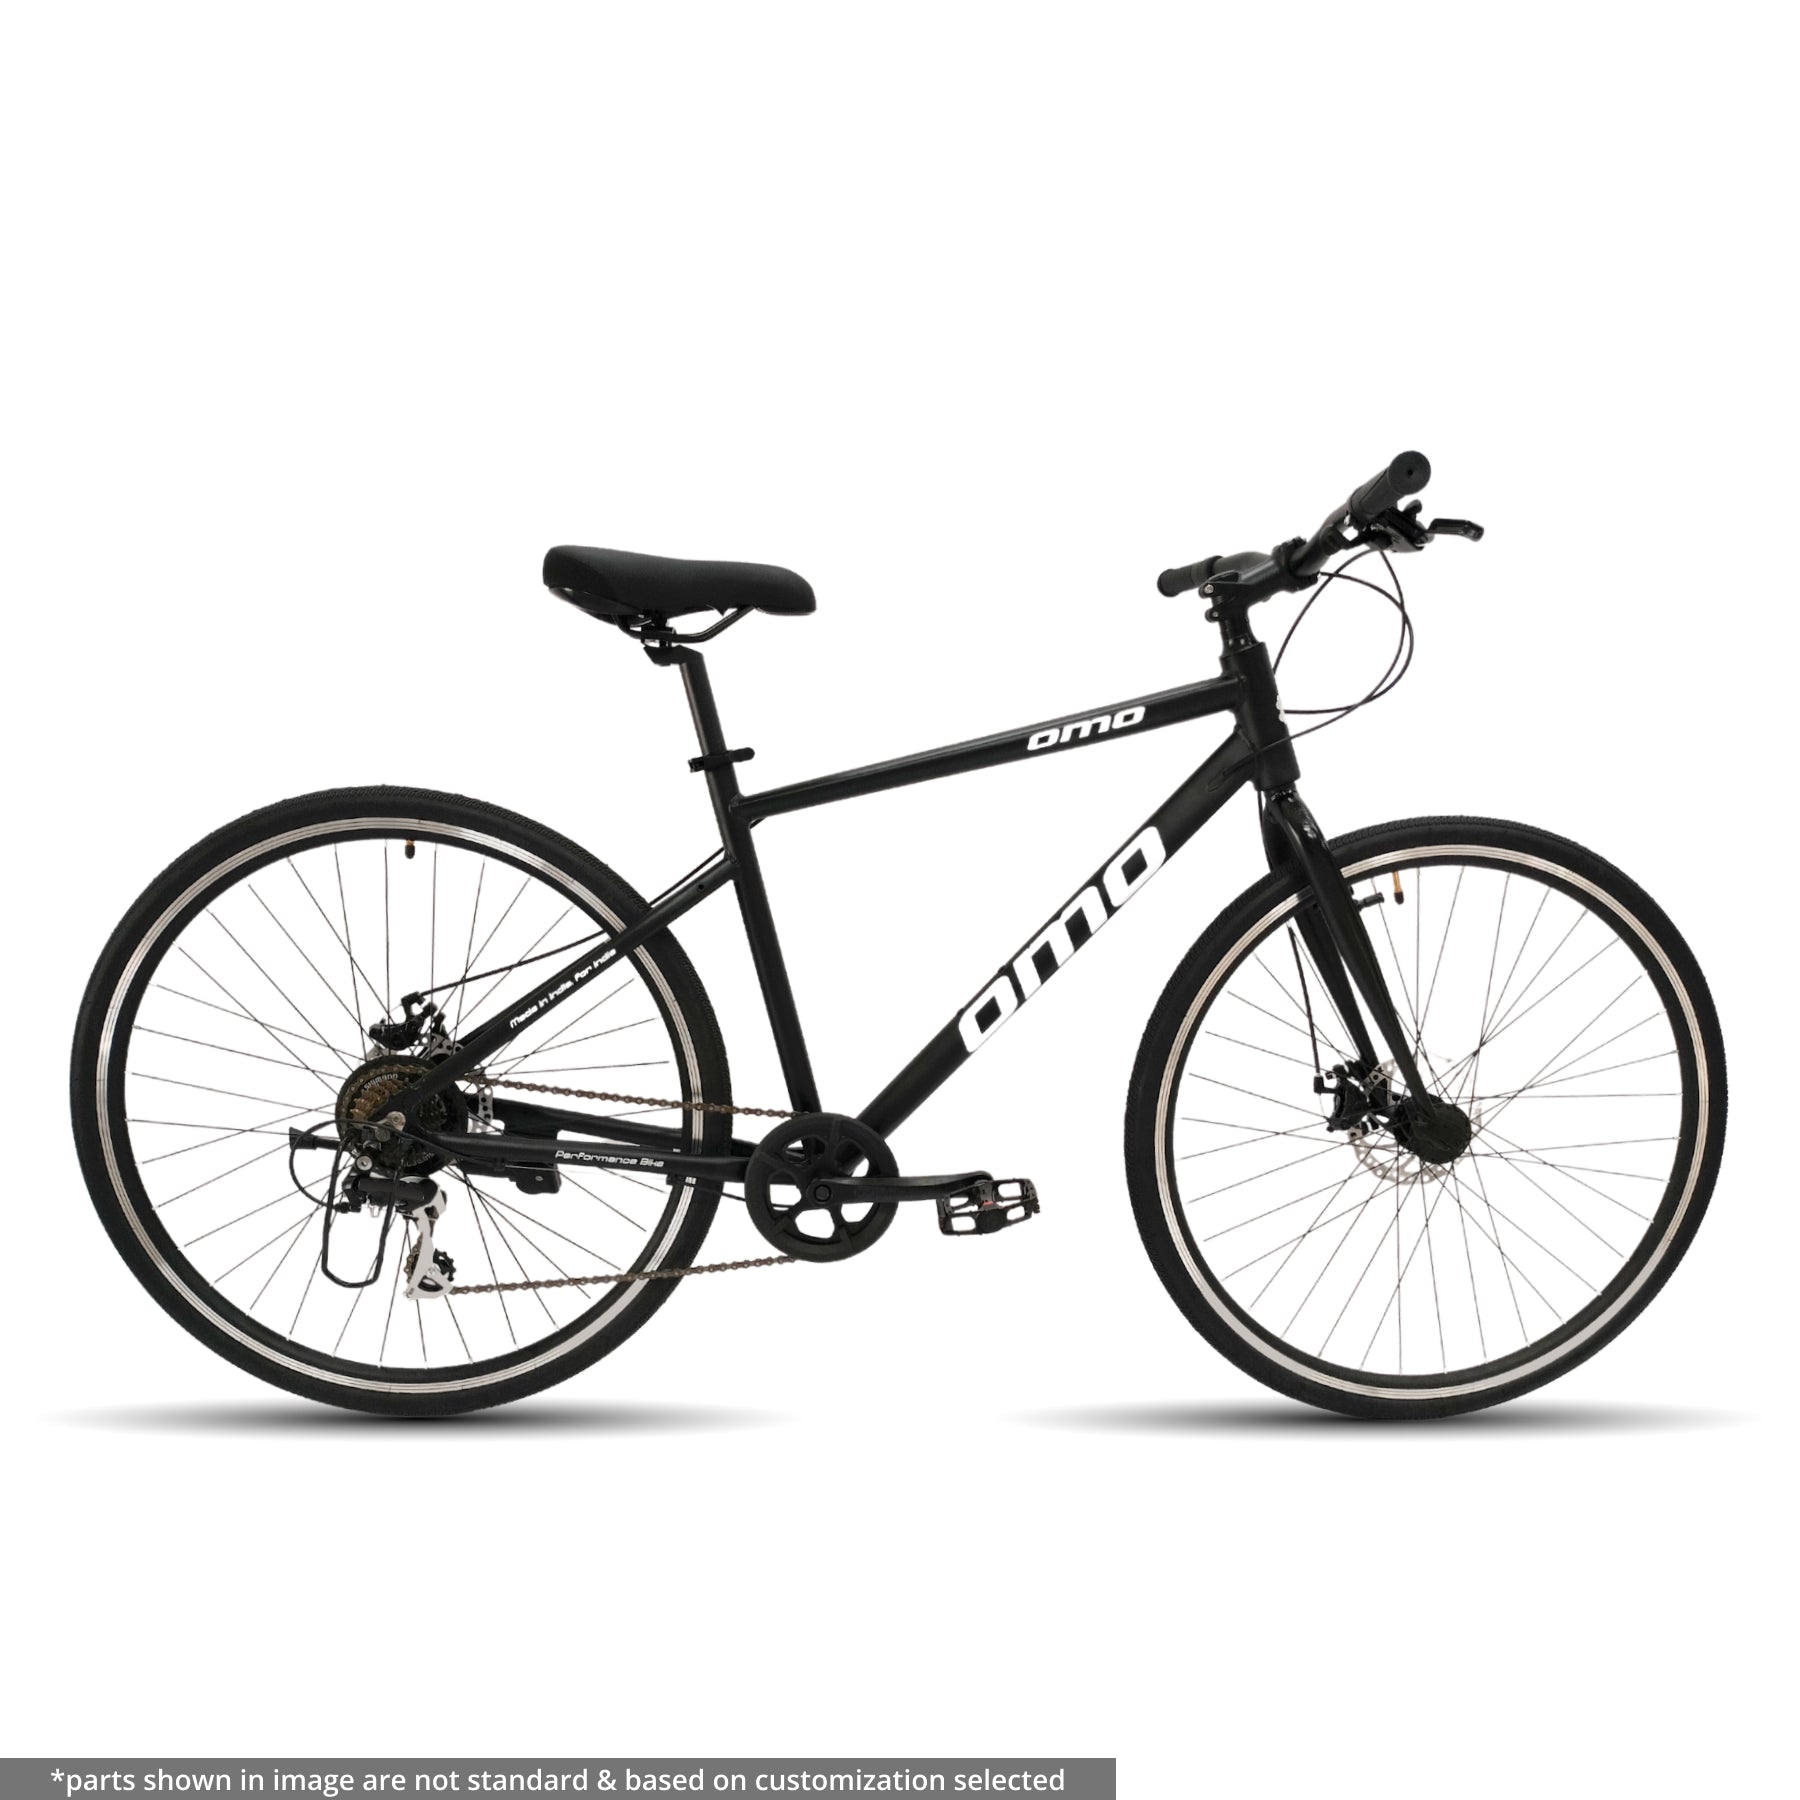 Omobikes hampi geared alloy frame hybrid bike with 7 speed shimano gear and dual disc brake black color